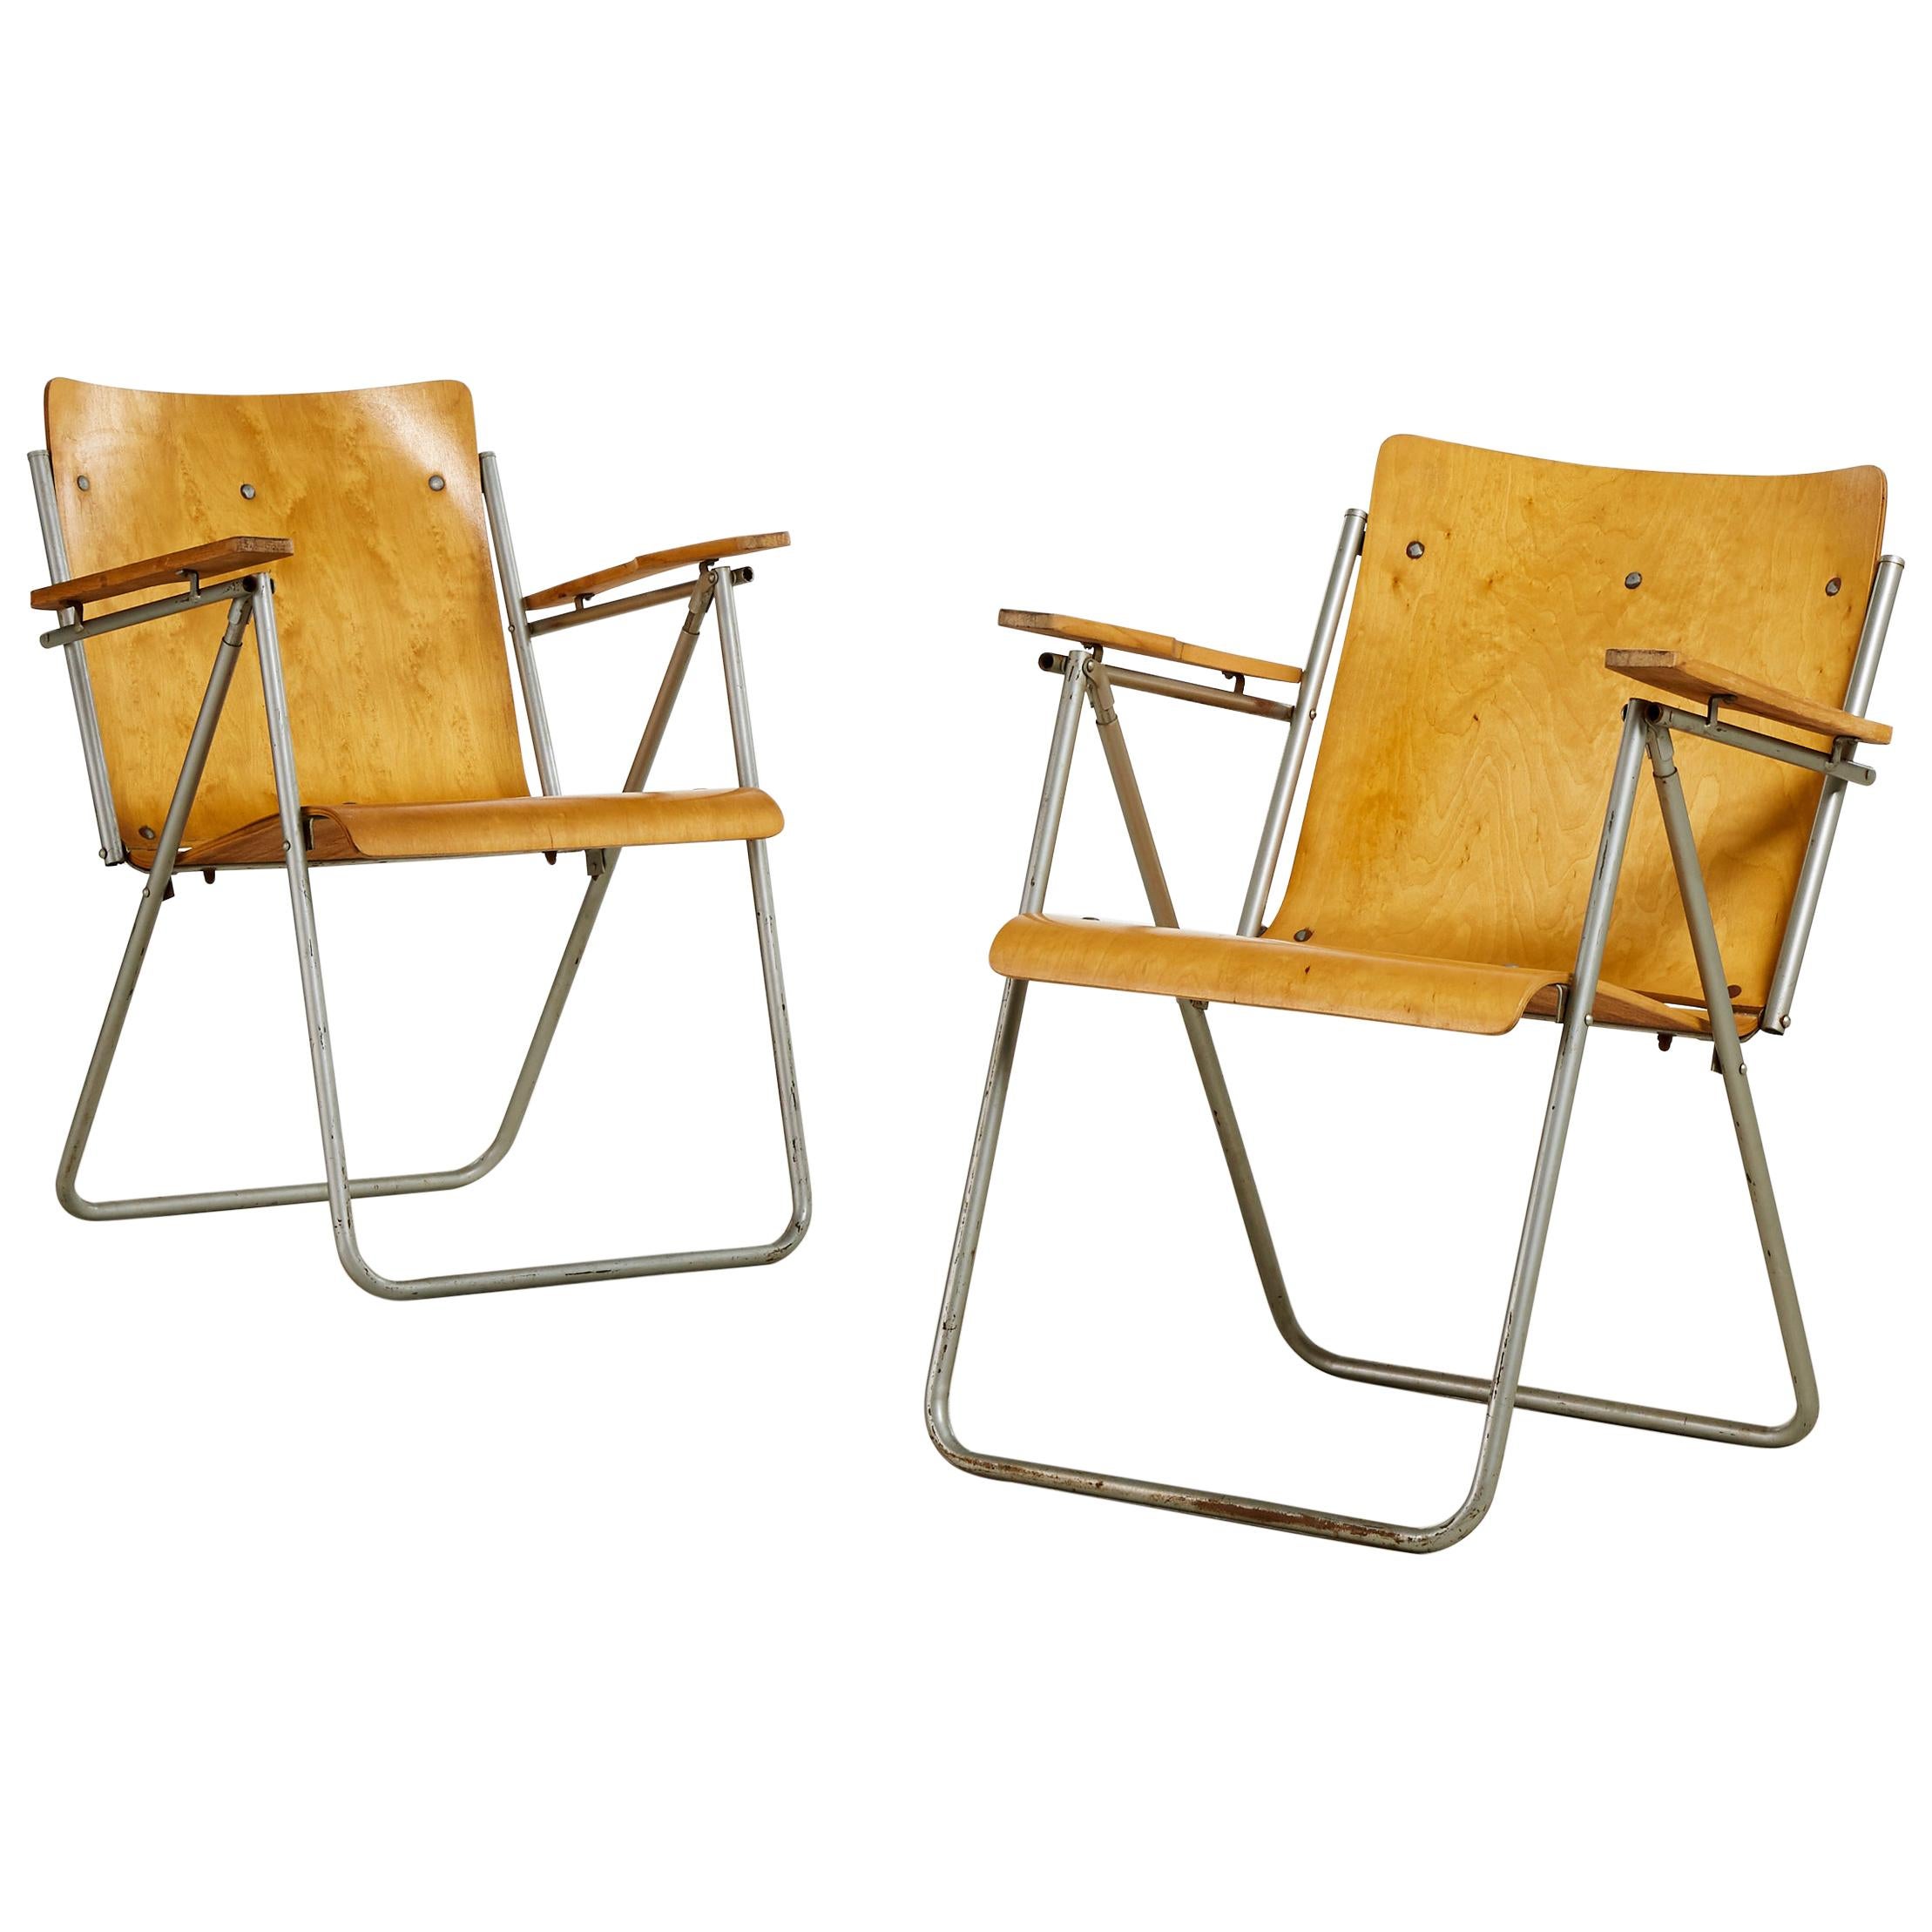 Scandinavian Pair of Folding Chairs in Molded Birch Wood, 1940s For Sale